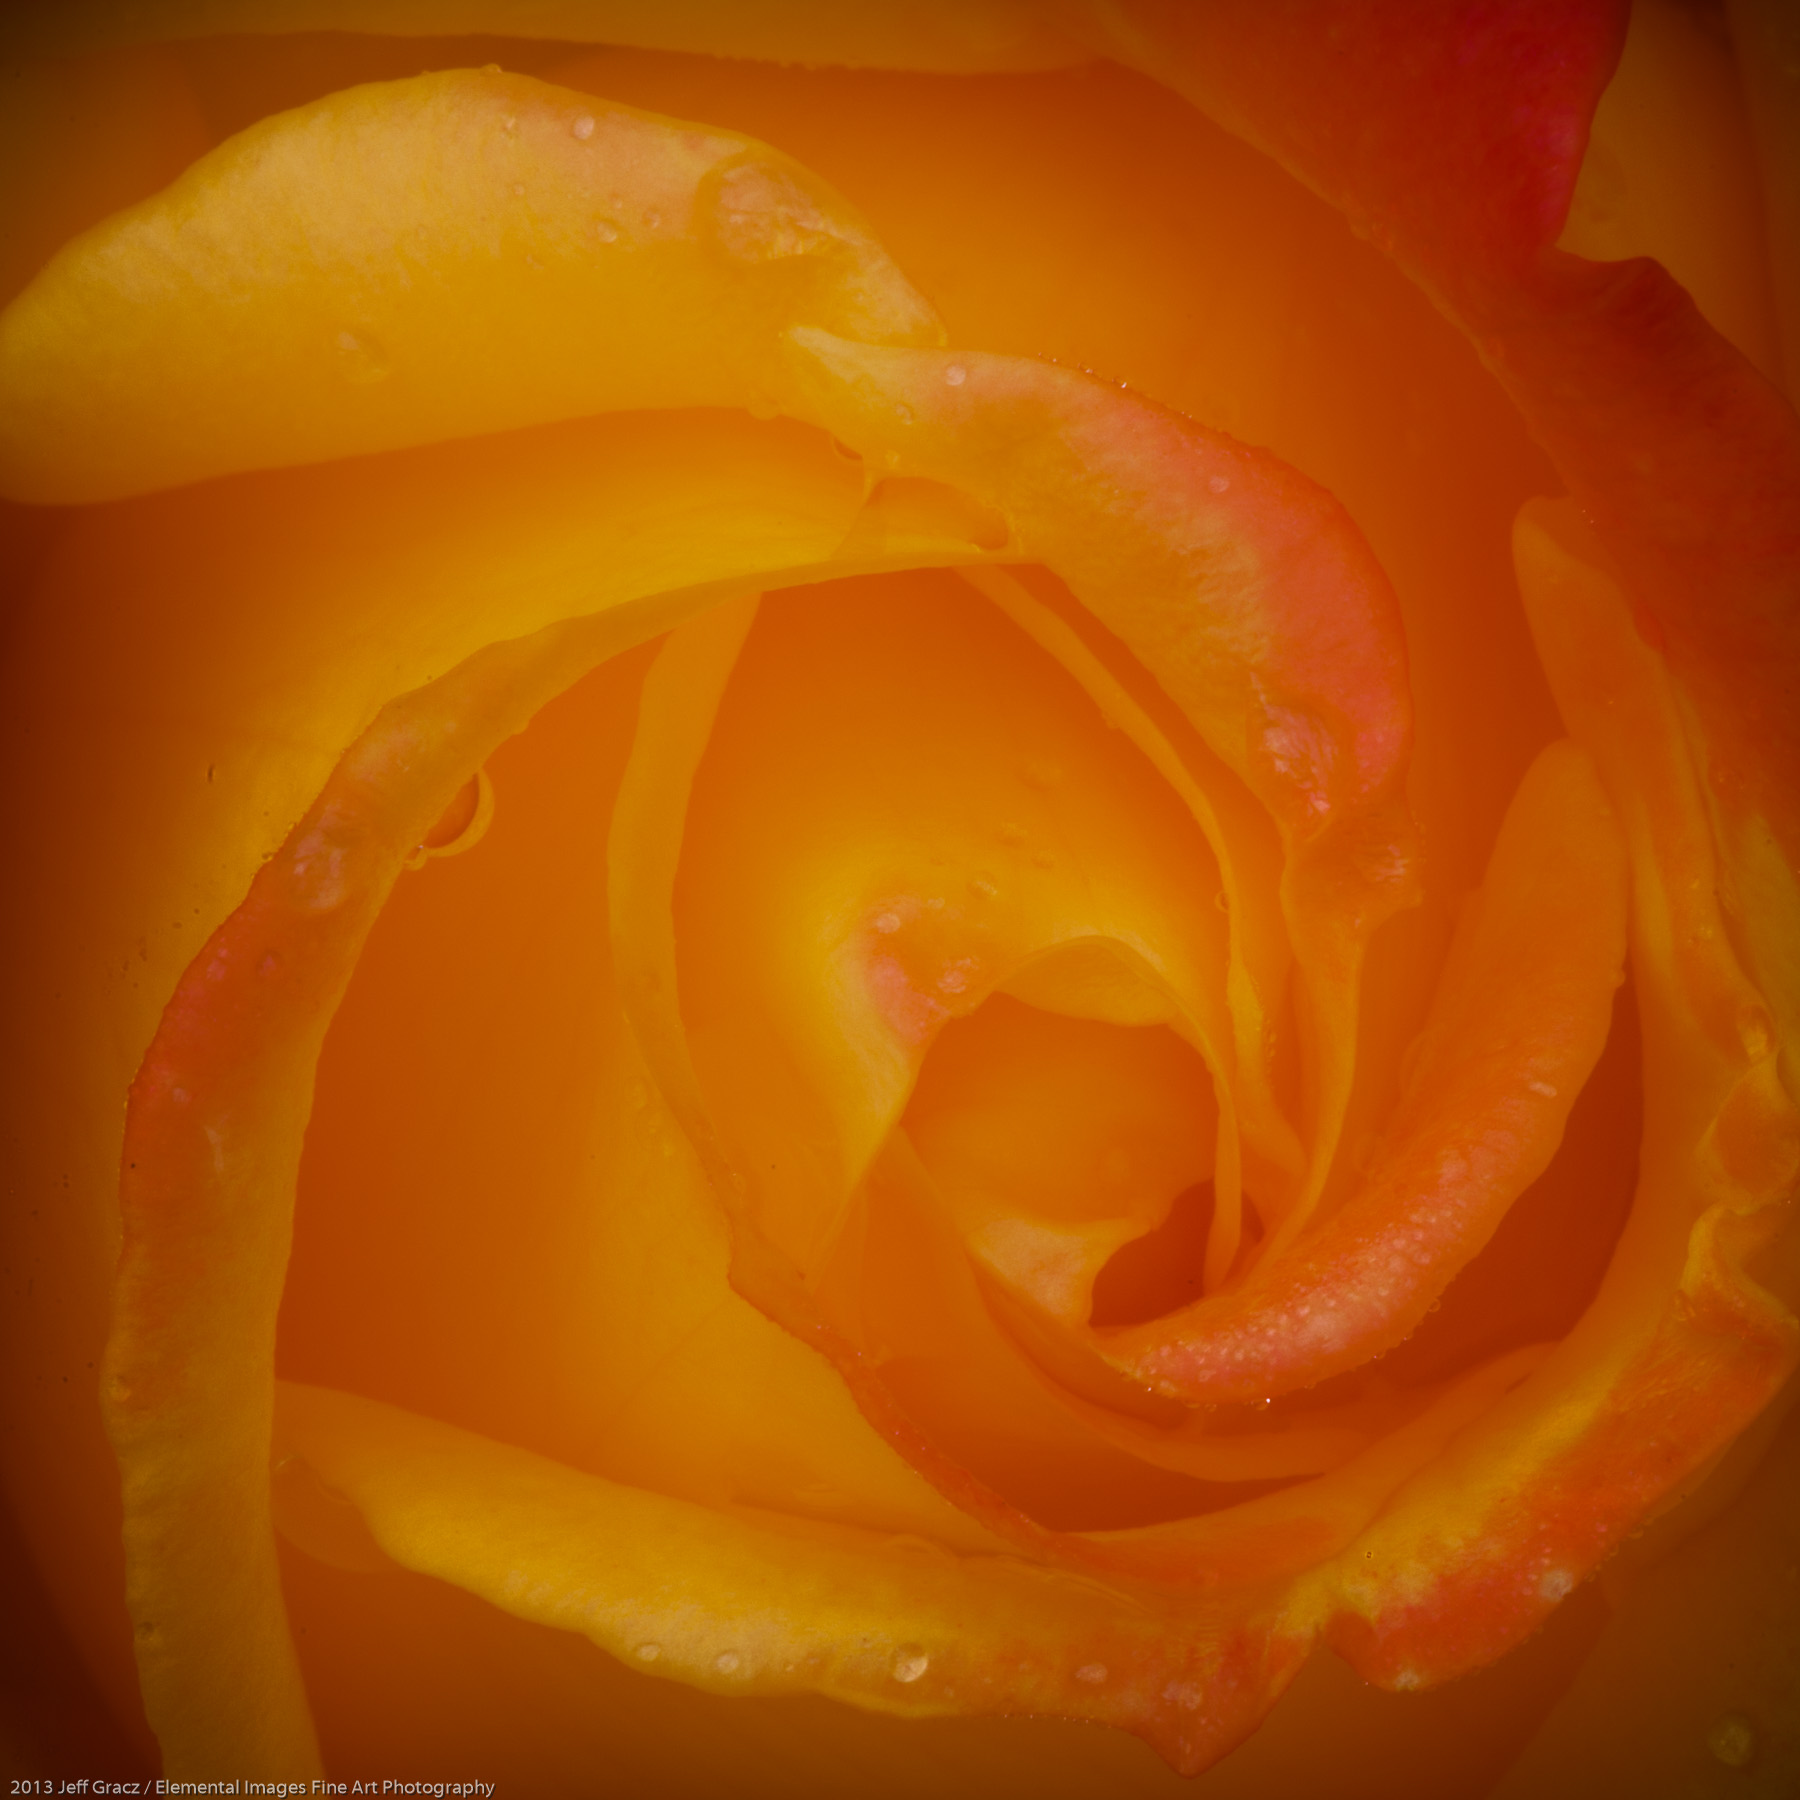 Roses XXXVIX | Portland | OR | USA - © 2013 Jeff Gracz / Elemental Images Fine Art Photography - All Rights Reserved Worldwide